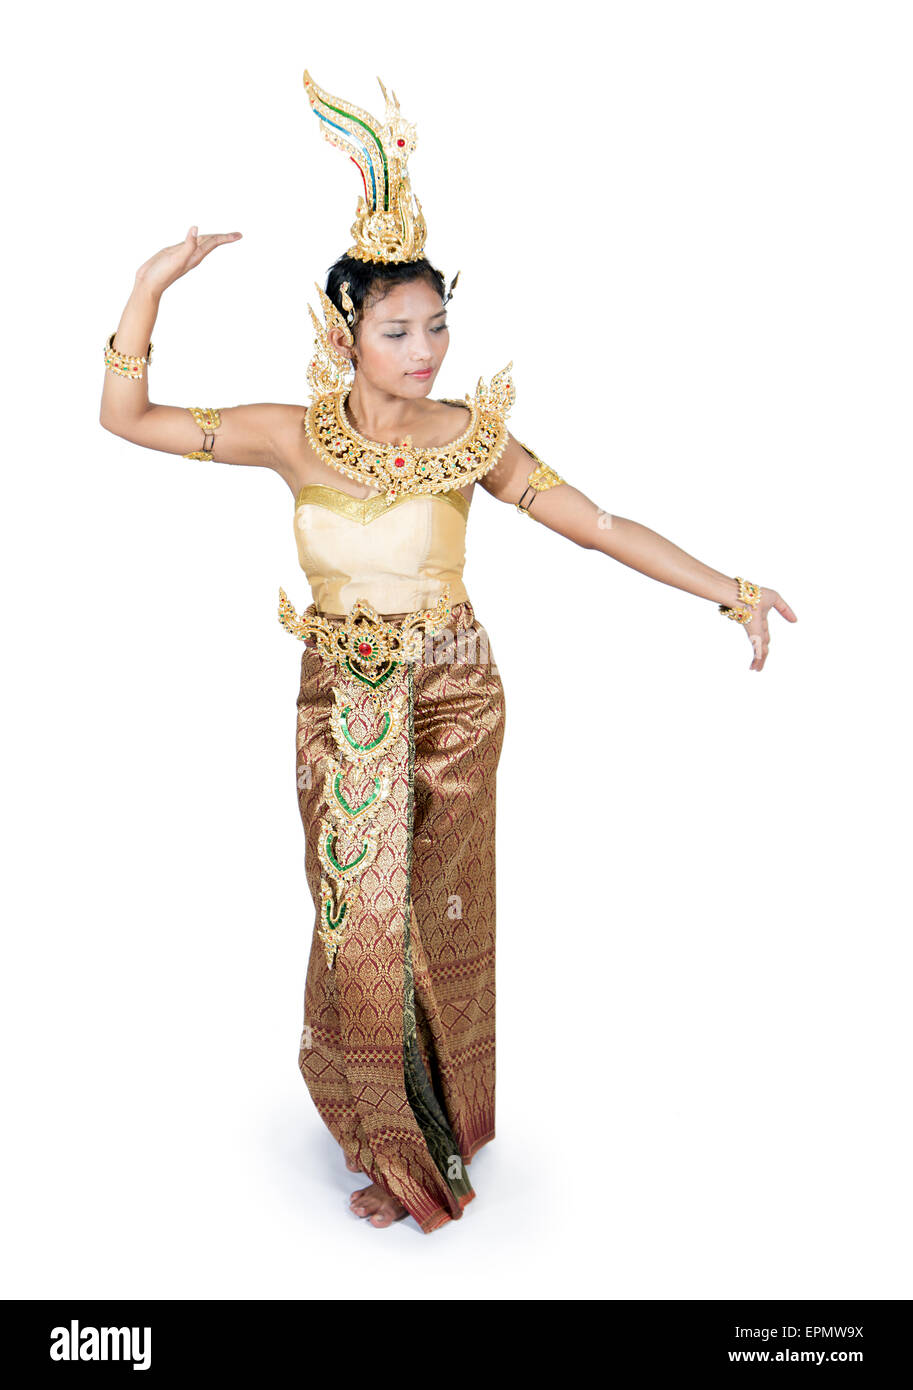 Thai woman in traditional costume dancing on white background Stock Photo